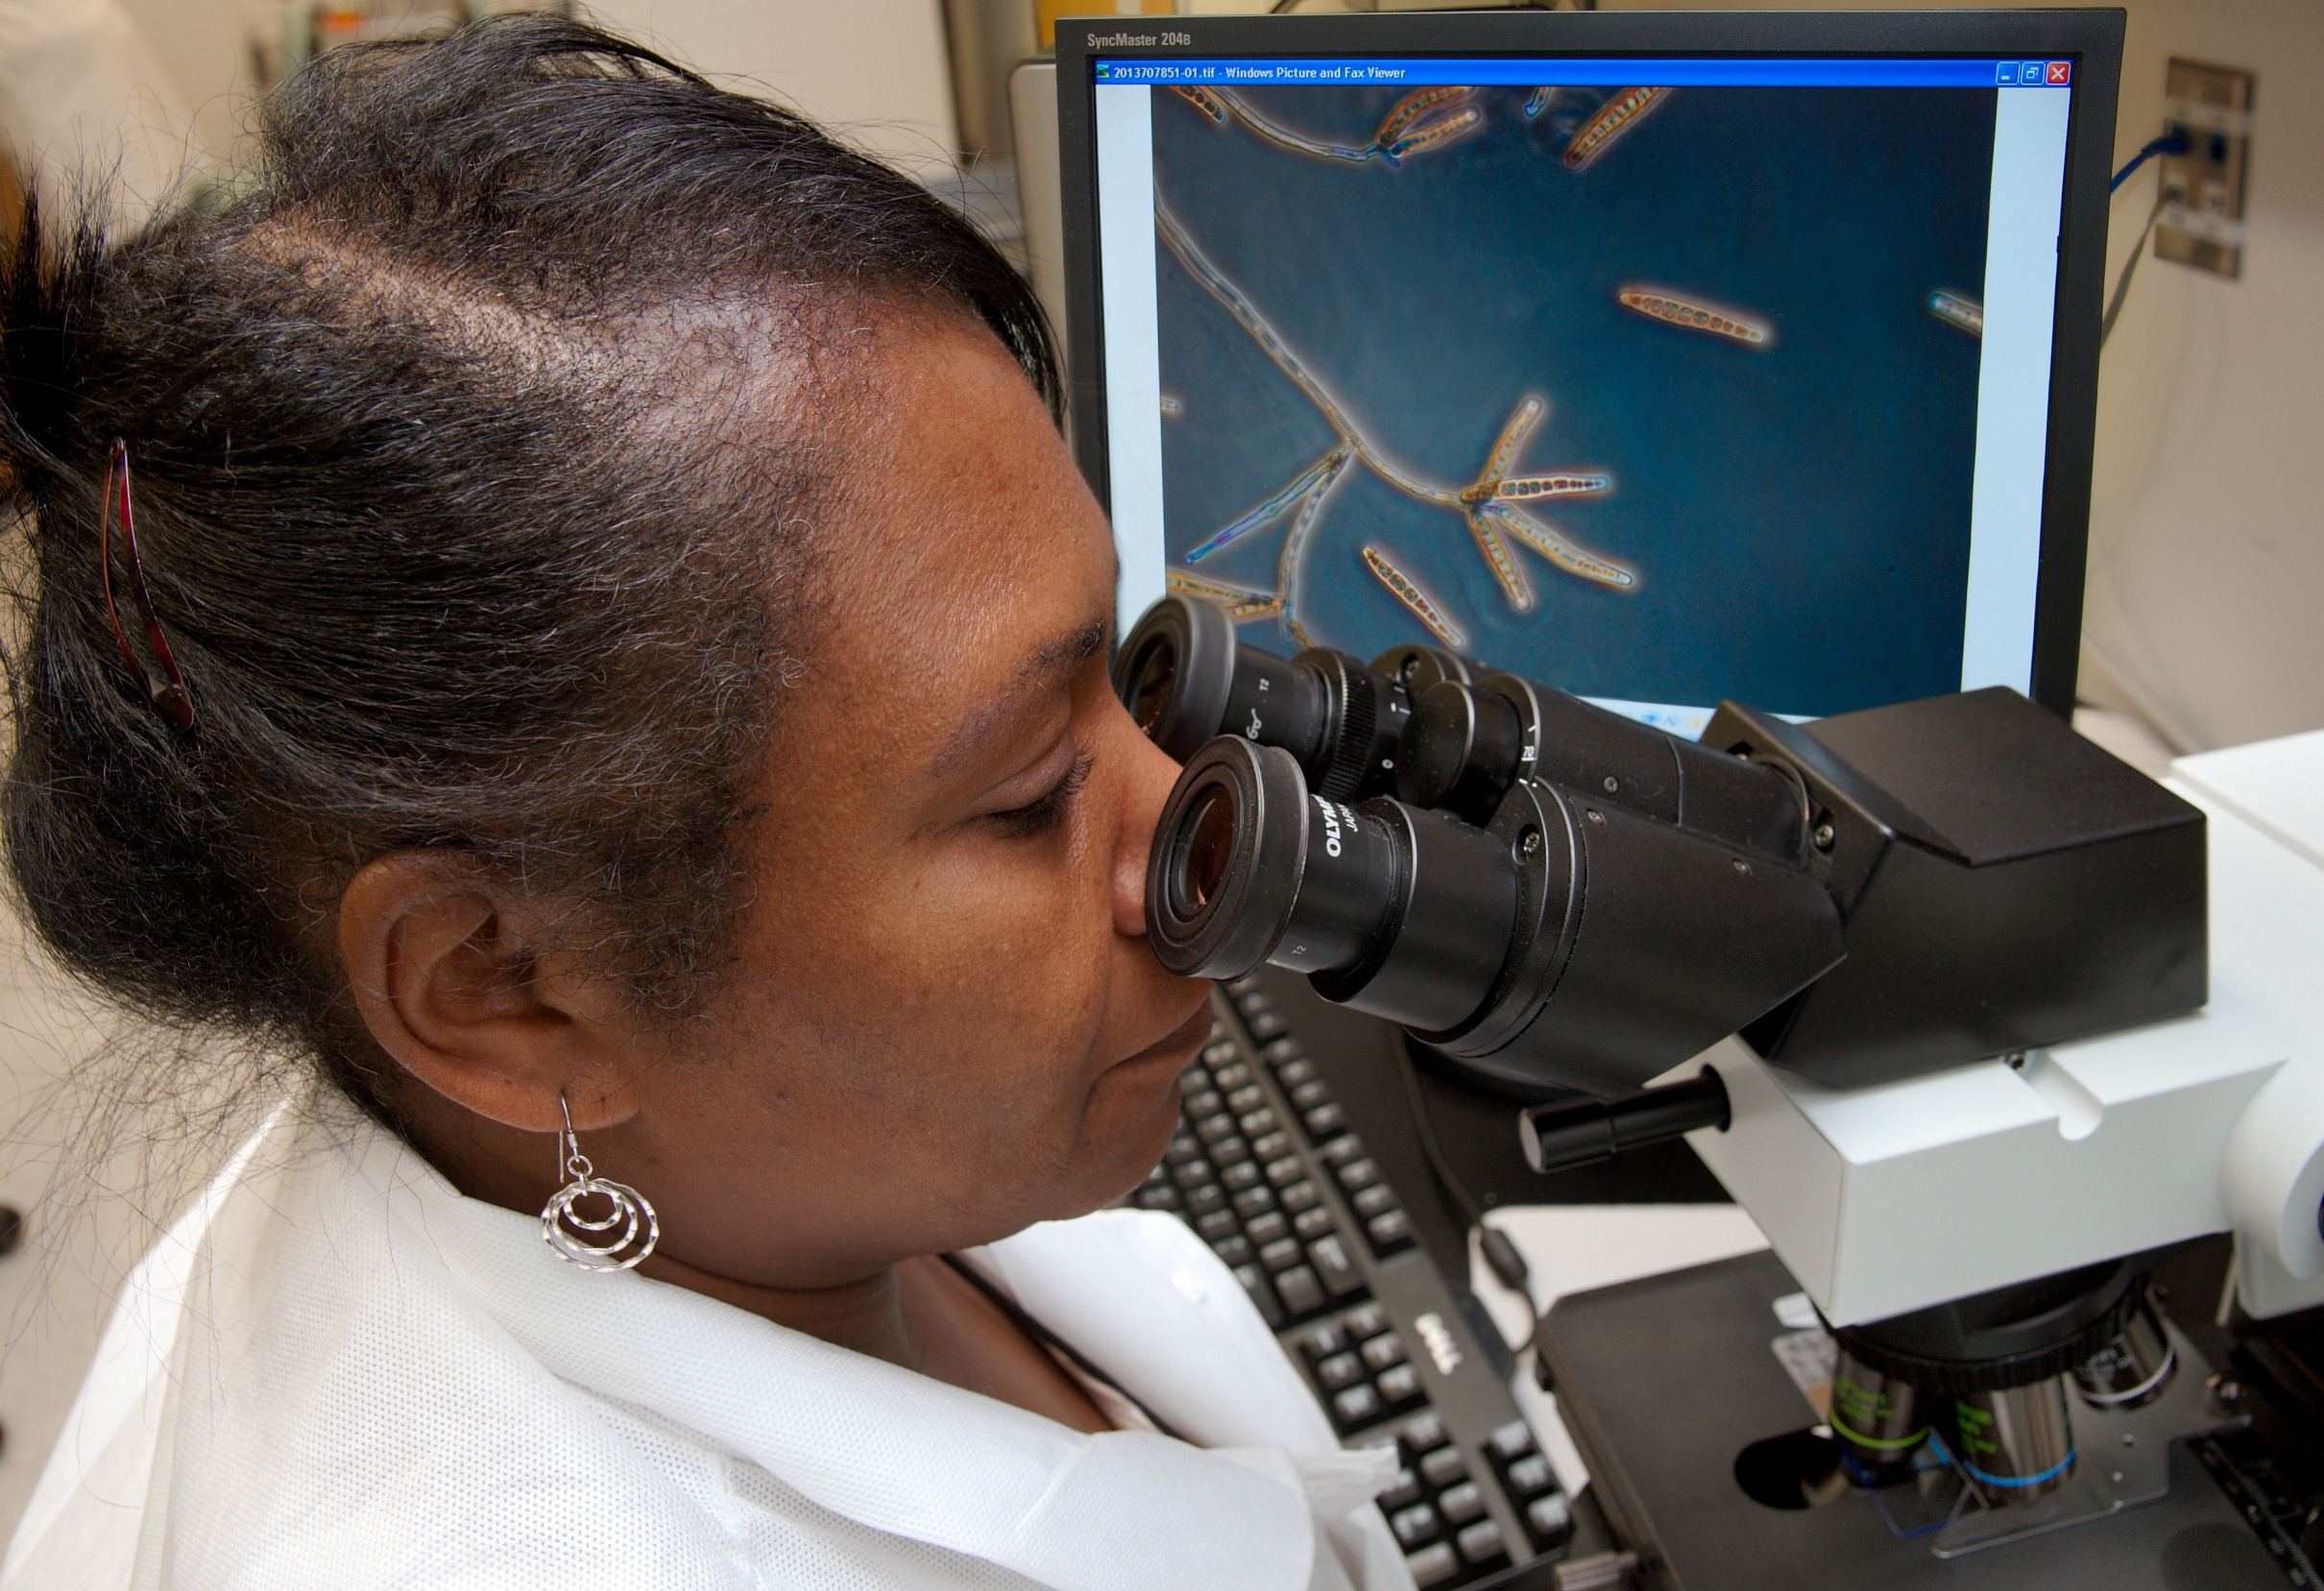 CDC scientist looks through microscope at fungus displayed on screen